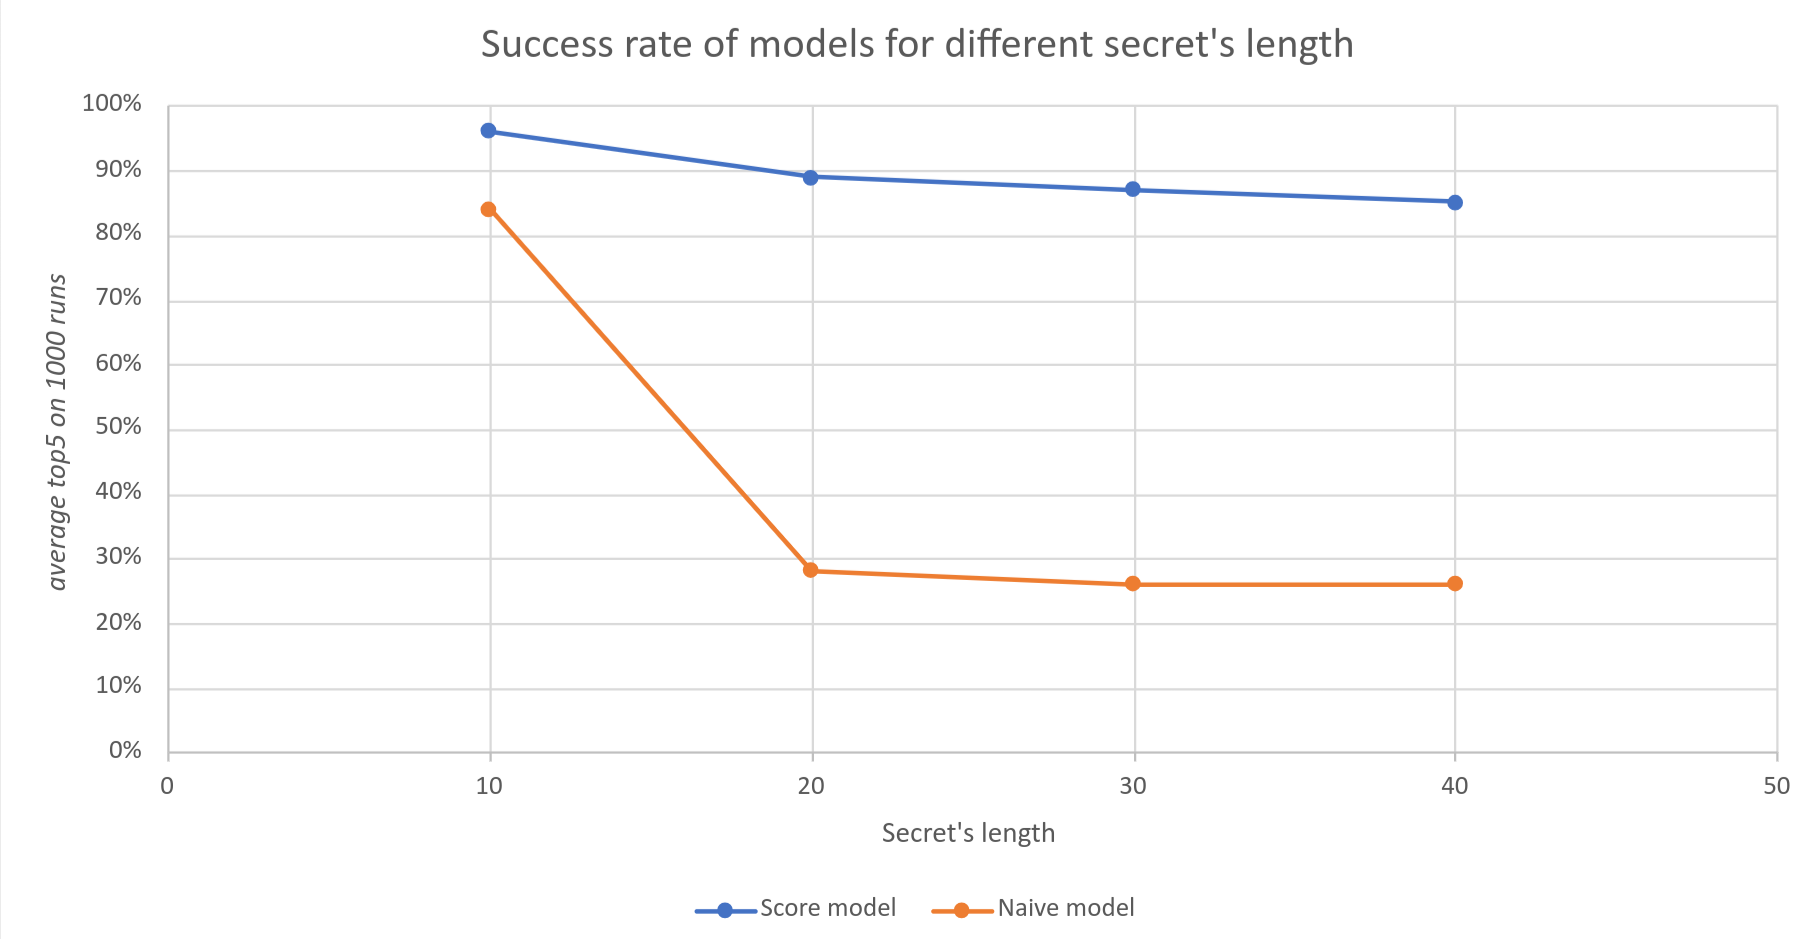 Figure 10: Success rates of the two models